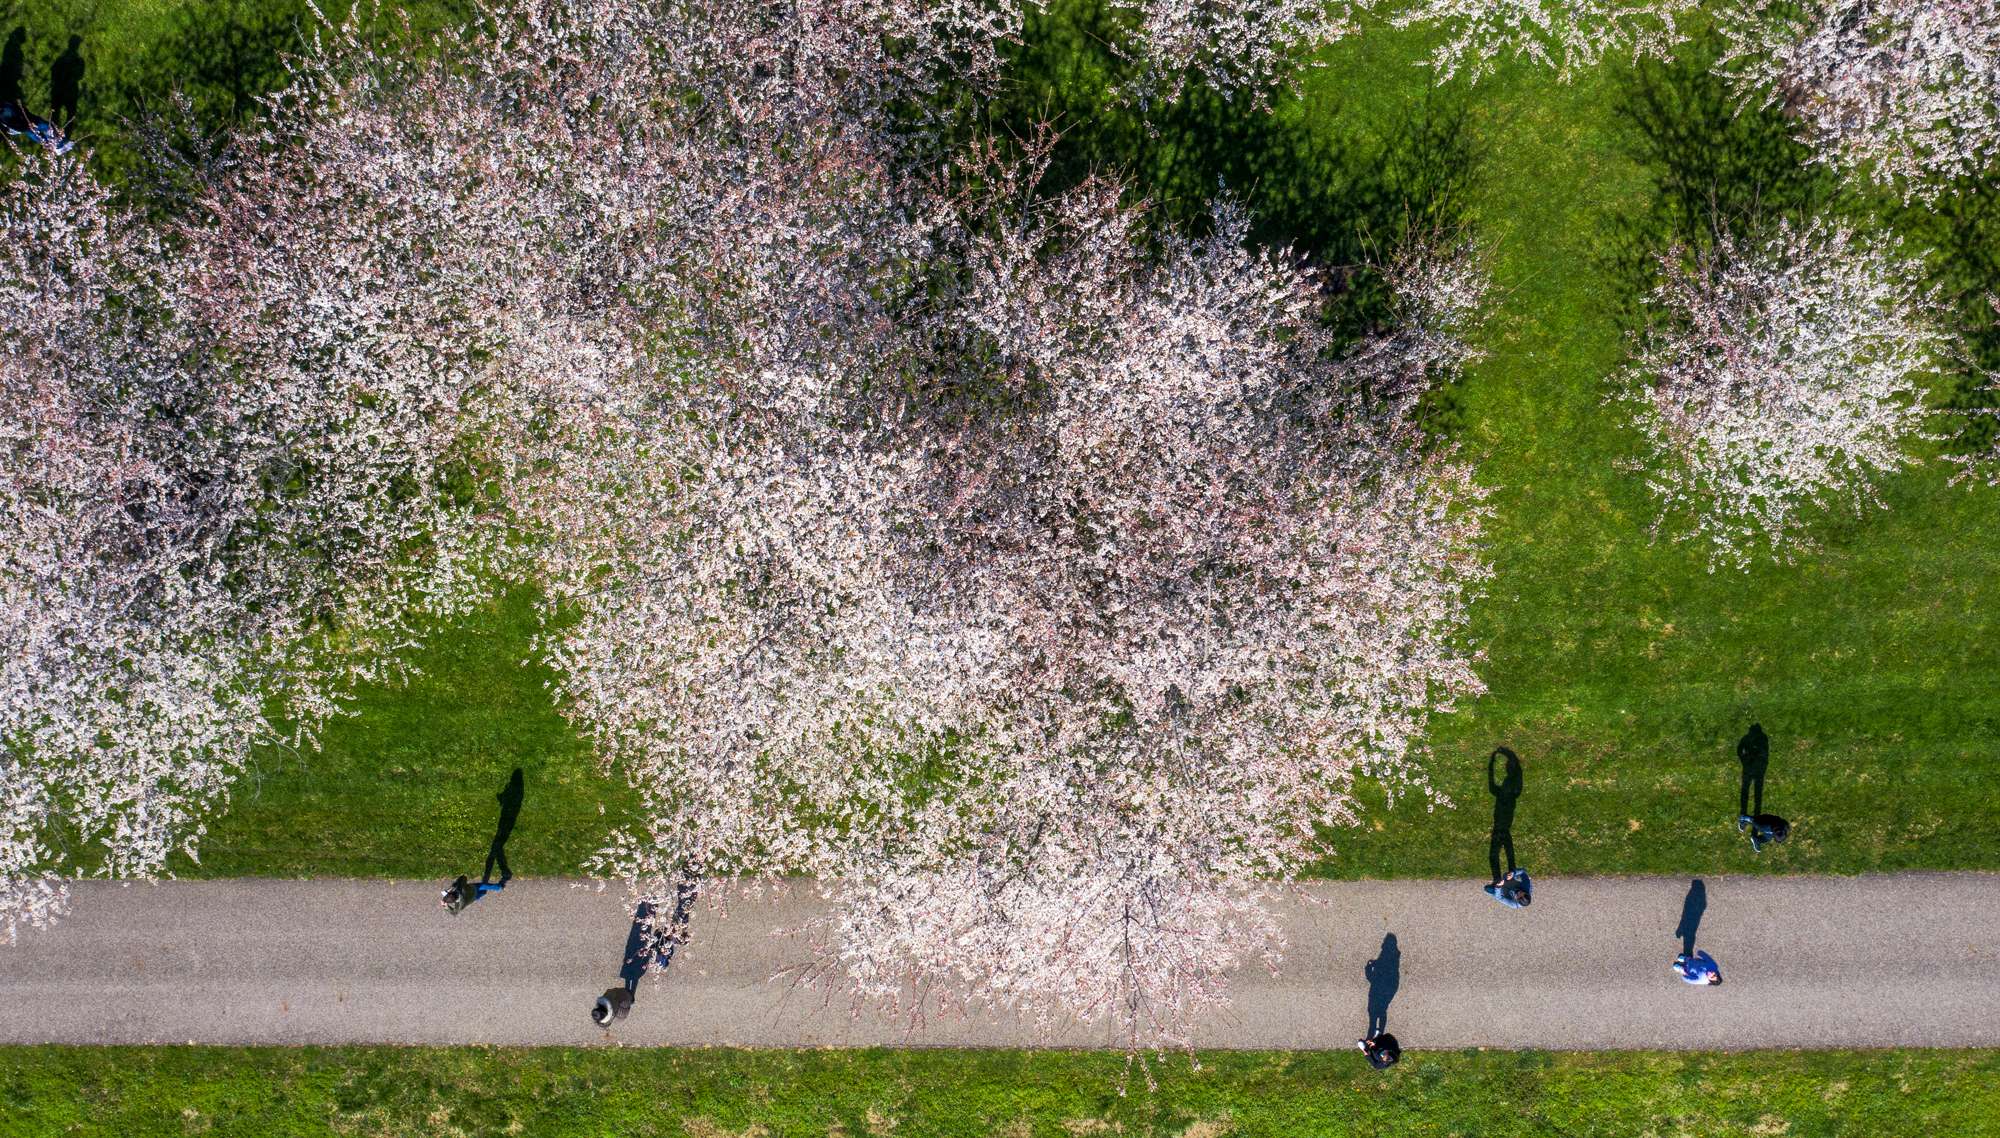 View of the blooming Cherry Blossoms taken from above